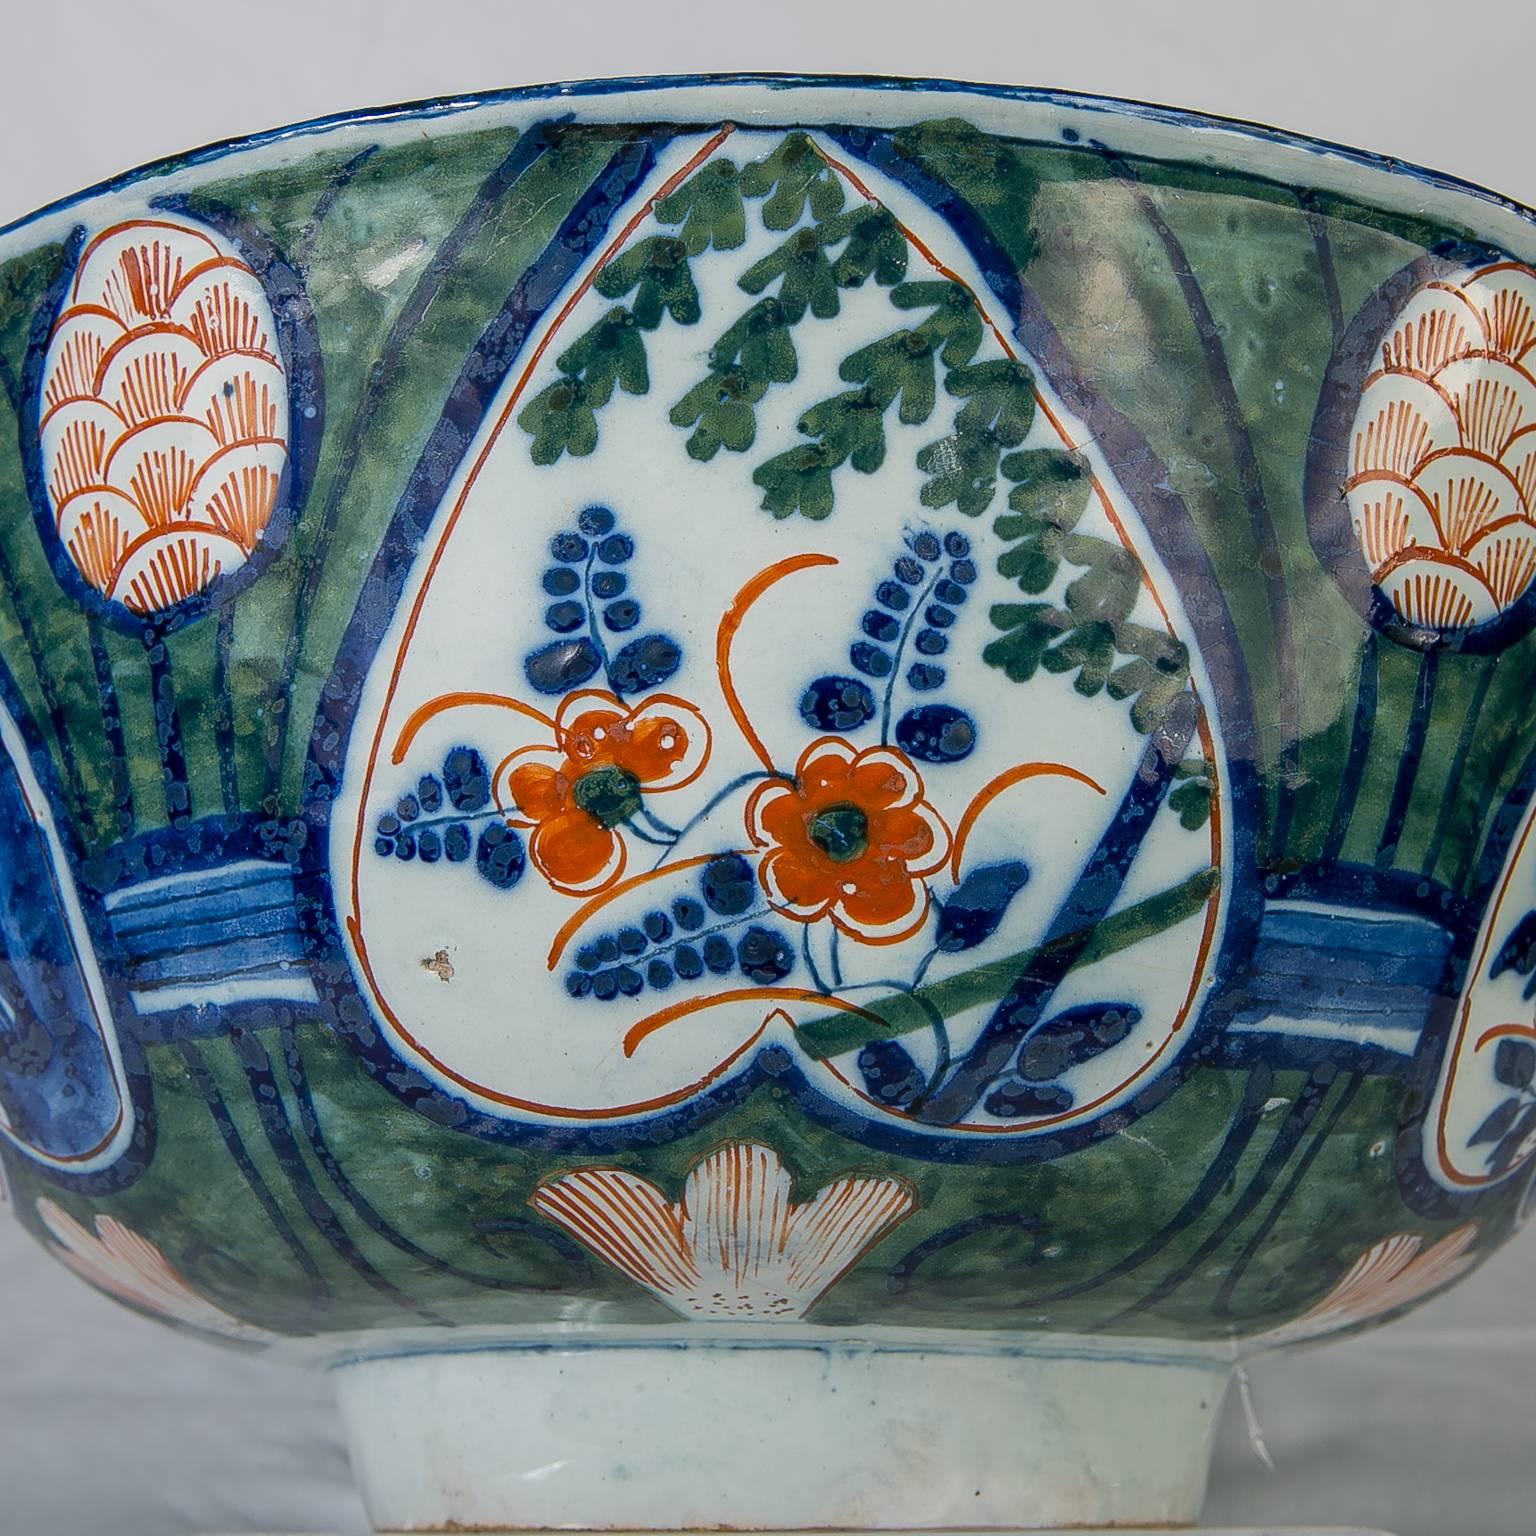 WHY WE LOVE IT: We been in business 58 years. This bowl is high on the list of our best finds.
A large Dutch Delft bowl made at the 